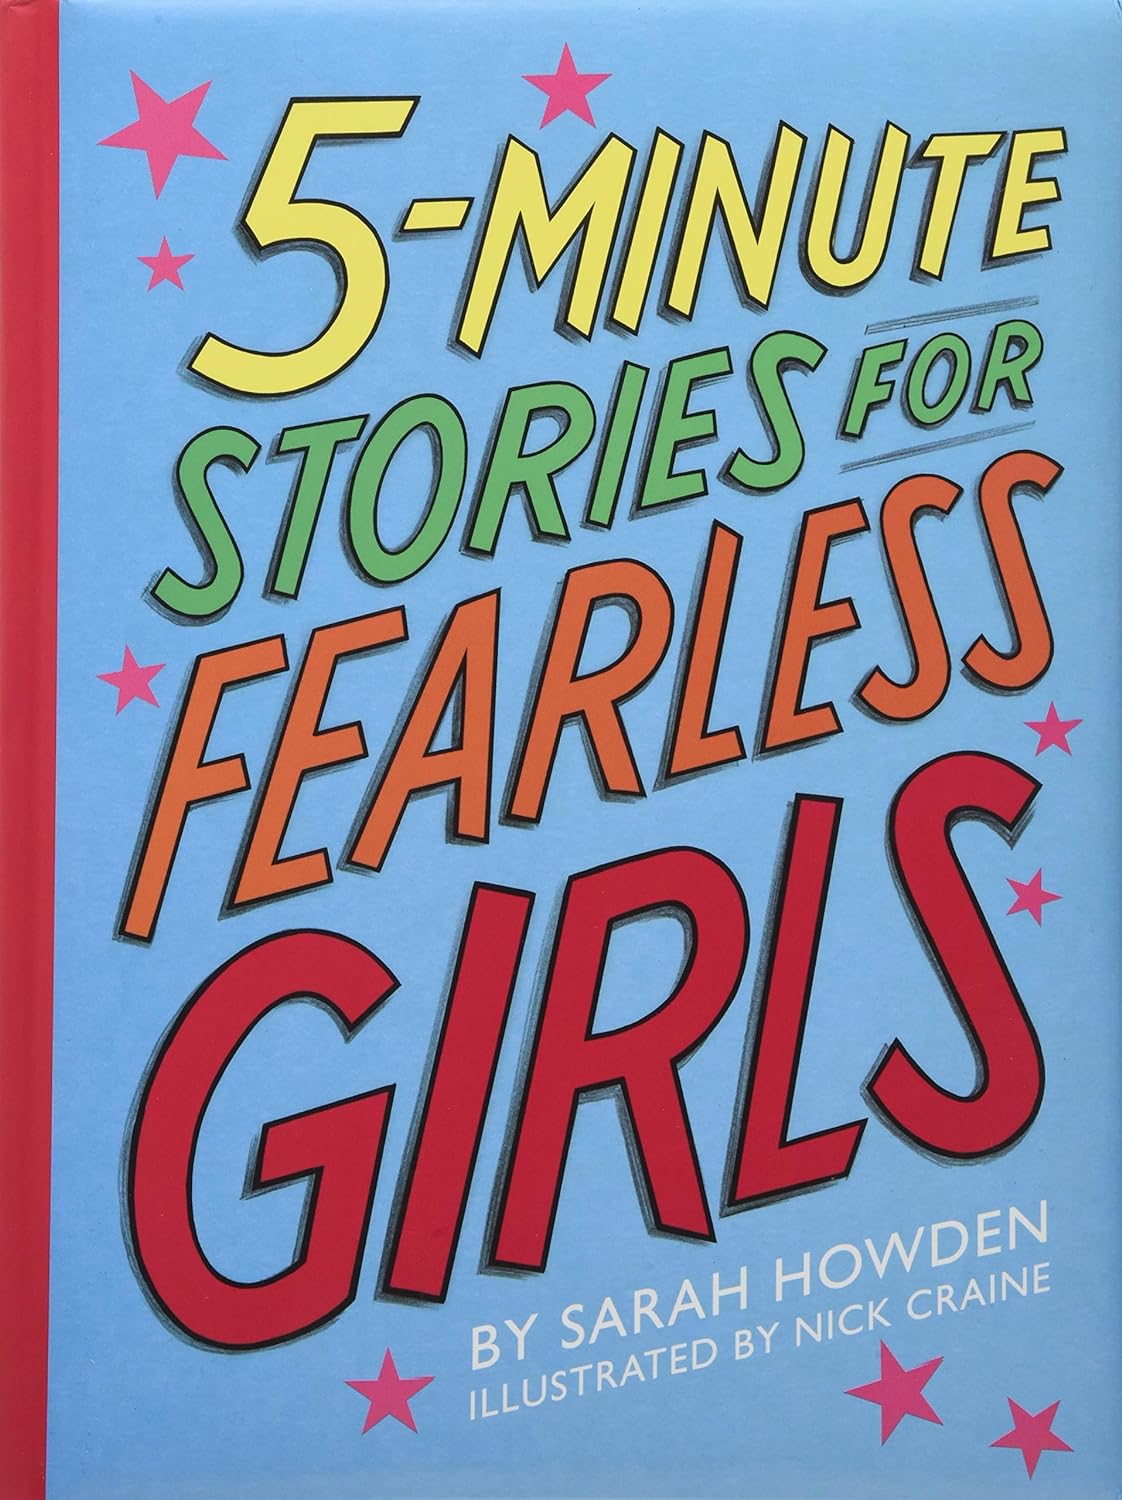 5-Minute Stories for Fearless Girls - Sarah Howden